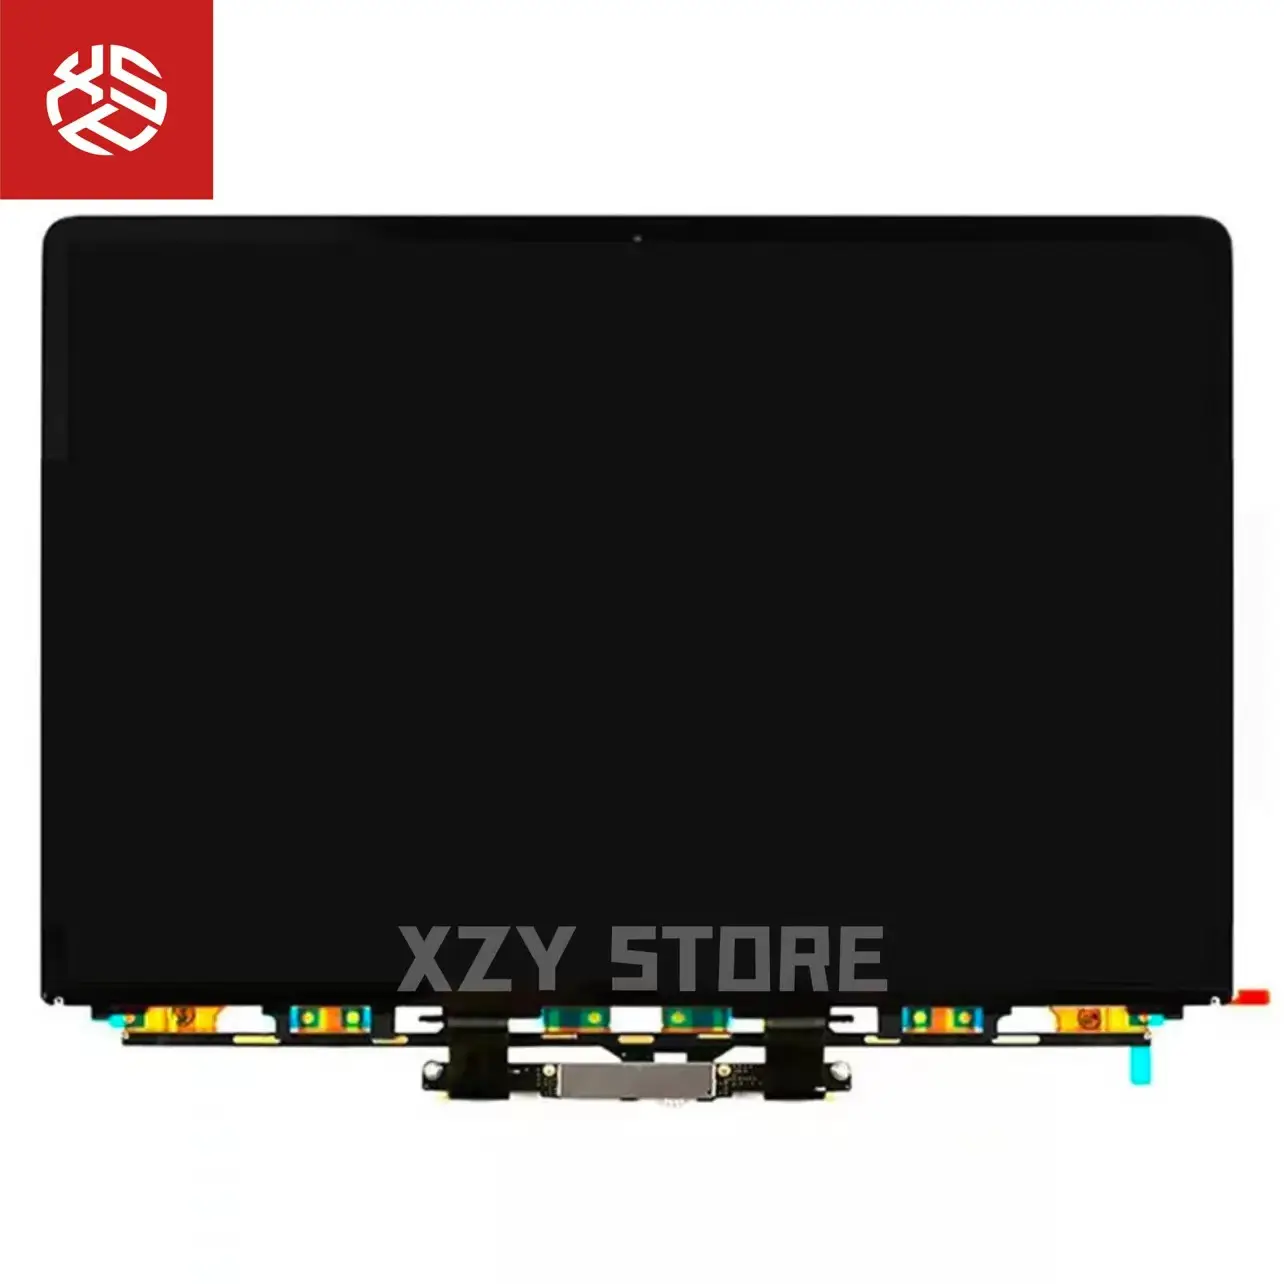 New Laptop A2337 LCD for Macbook Air M1 13 inch Display Screen Panel Glass Monitor Replacement 2020 Year 1 buyer